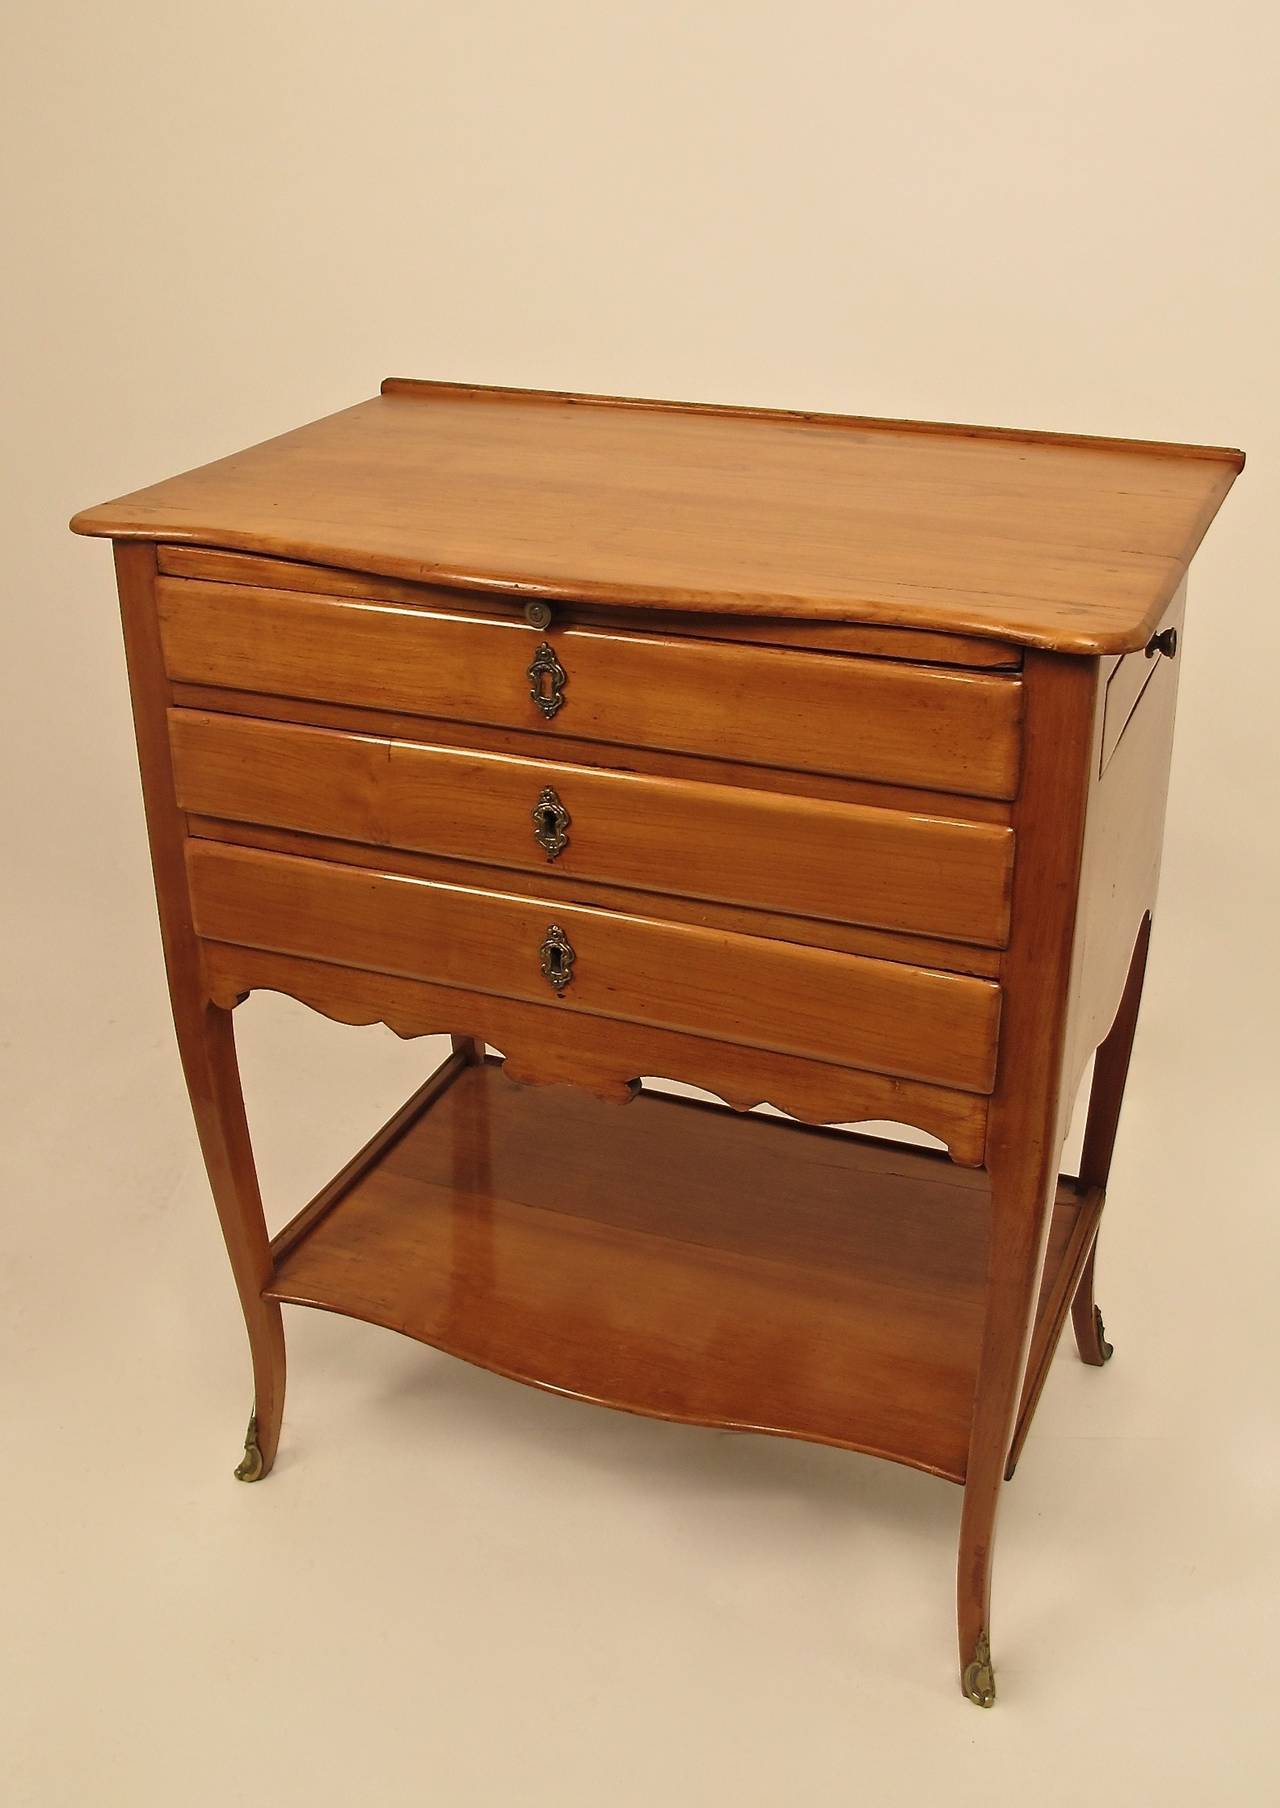 A French Provincial style cherrywood work or sewing side table, late 18th-early 19th century. Having a leather inset pull-out work surface, three front drawers, one side drawer, and a back pull up partition.